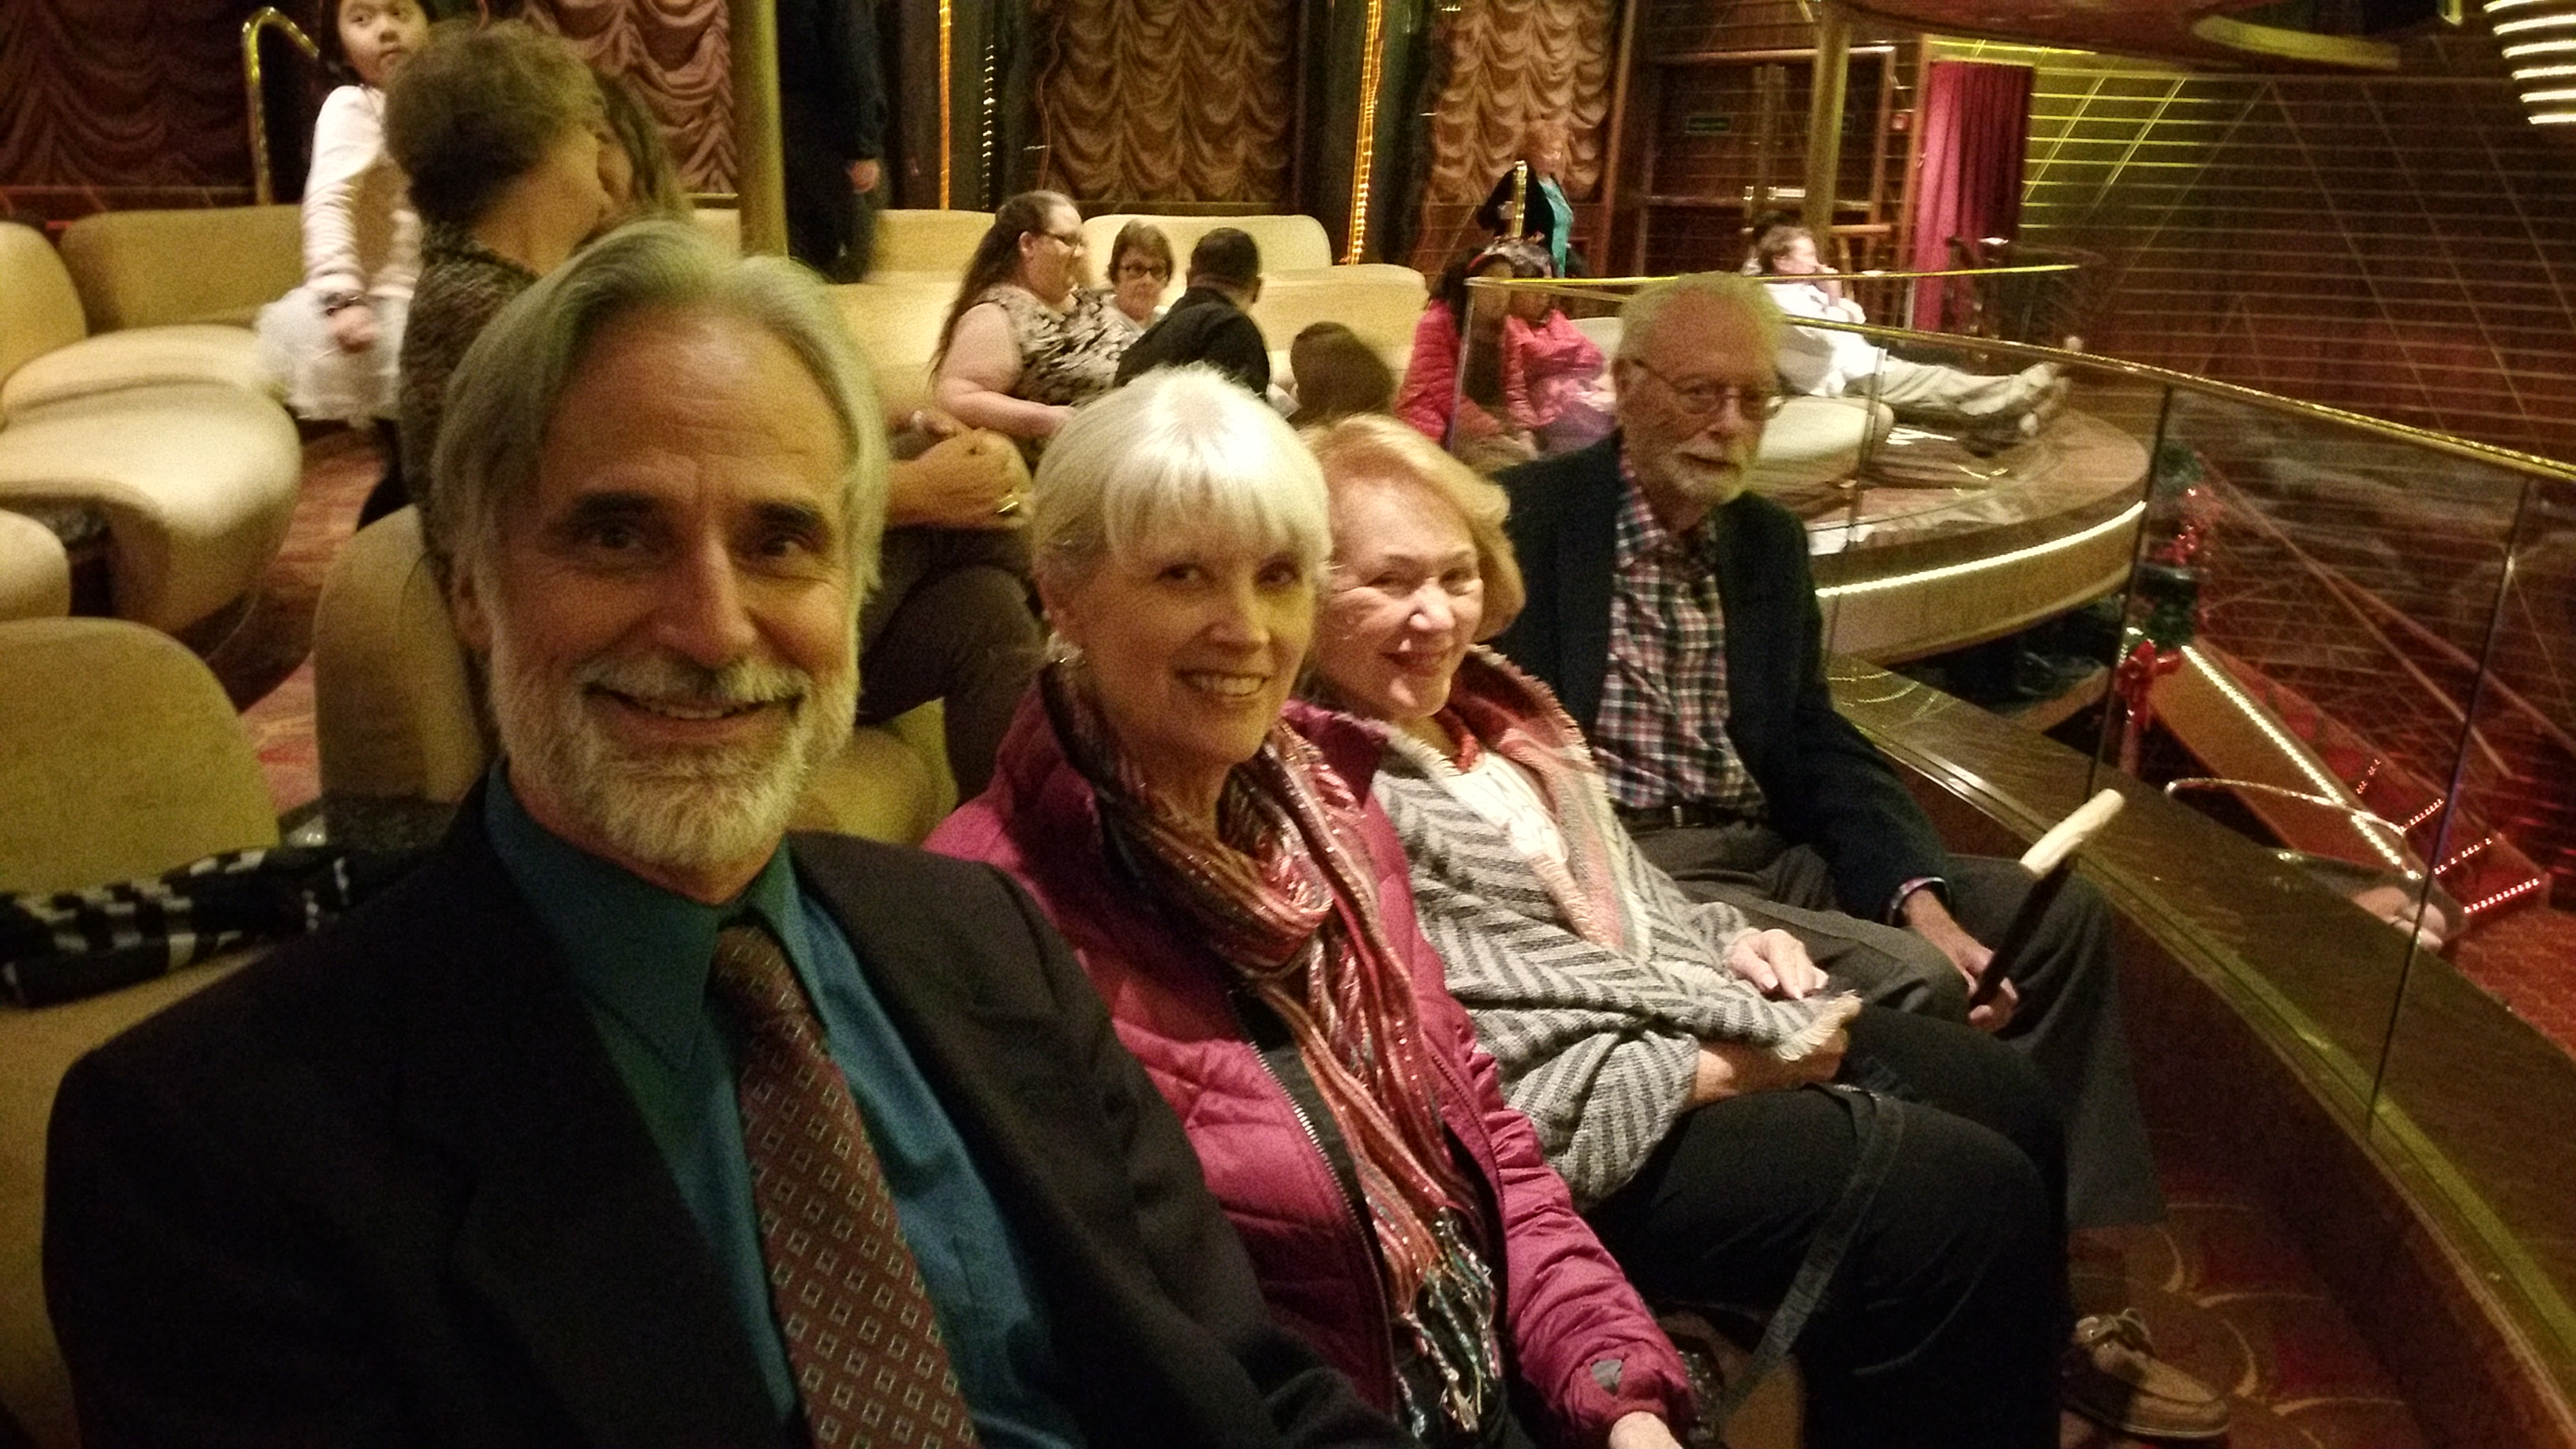 Another cruise - Mark and Carol, with Ken and Faye